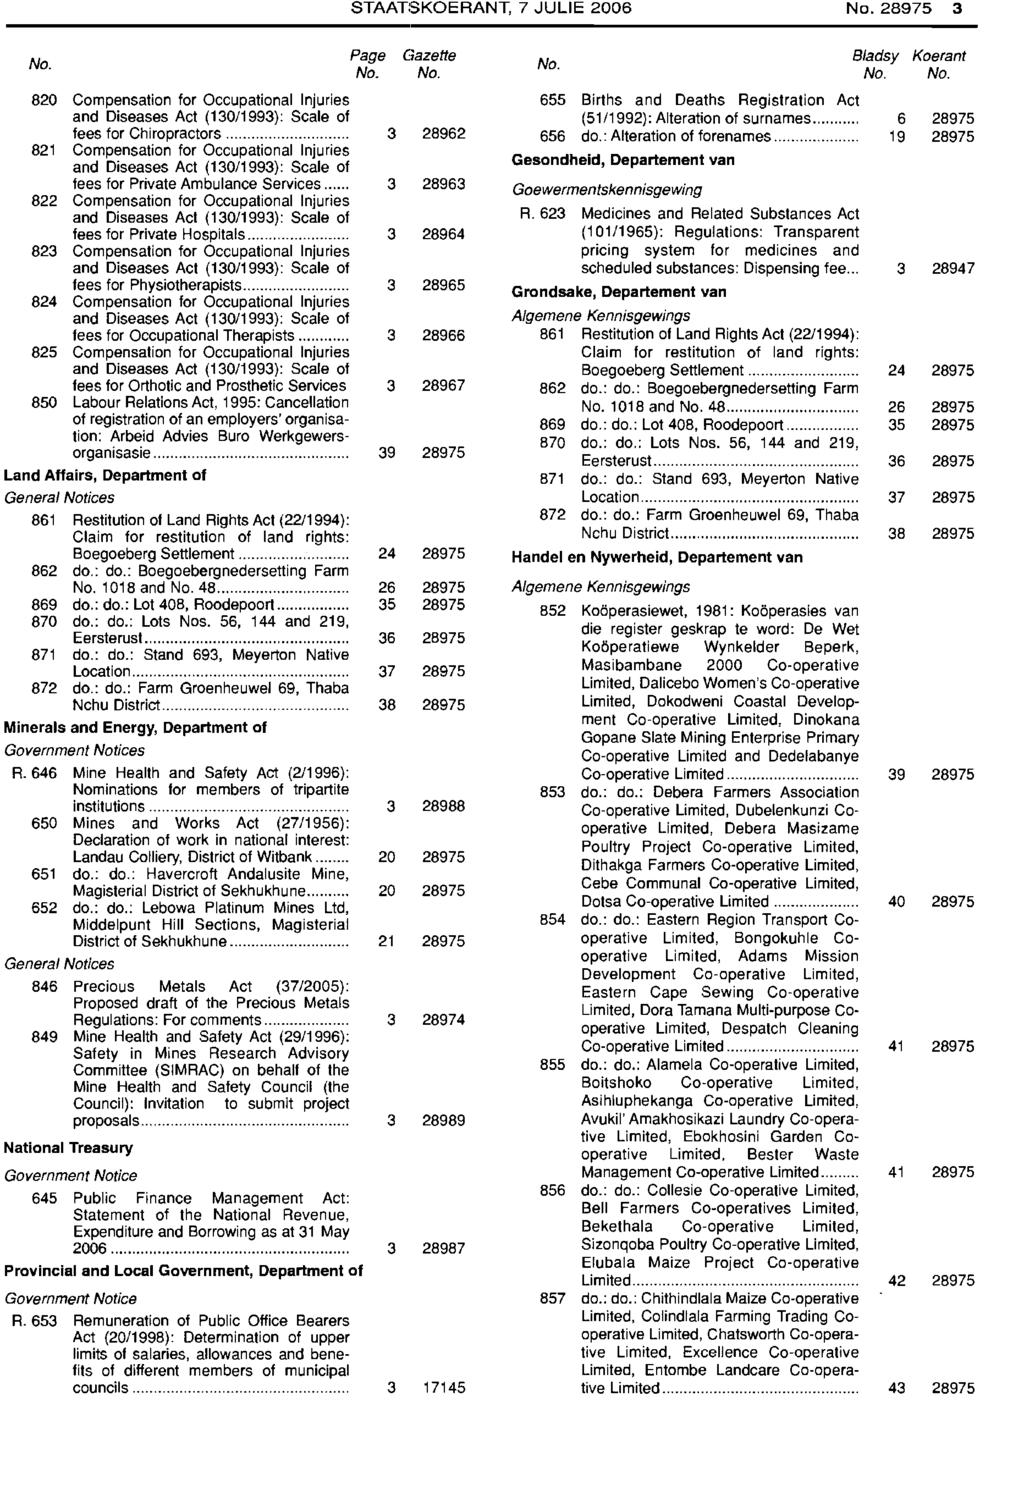 STAATSKOERANT, 7 JULIE 2006 28975 3 Page Gazette 820 Compensation for Occupational Injuries and Diseases Act (130/1993): Scale of fees for Chiropractors.